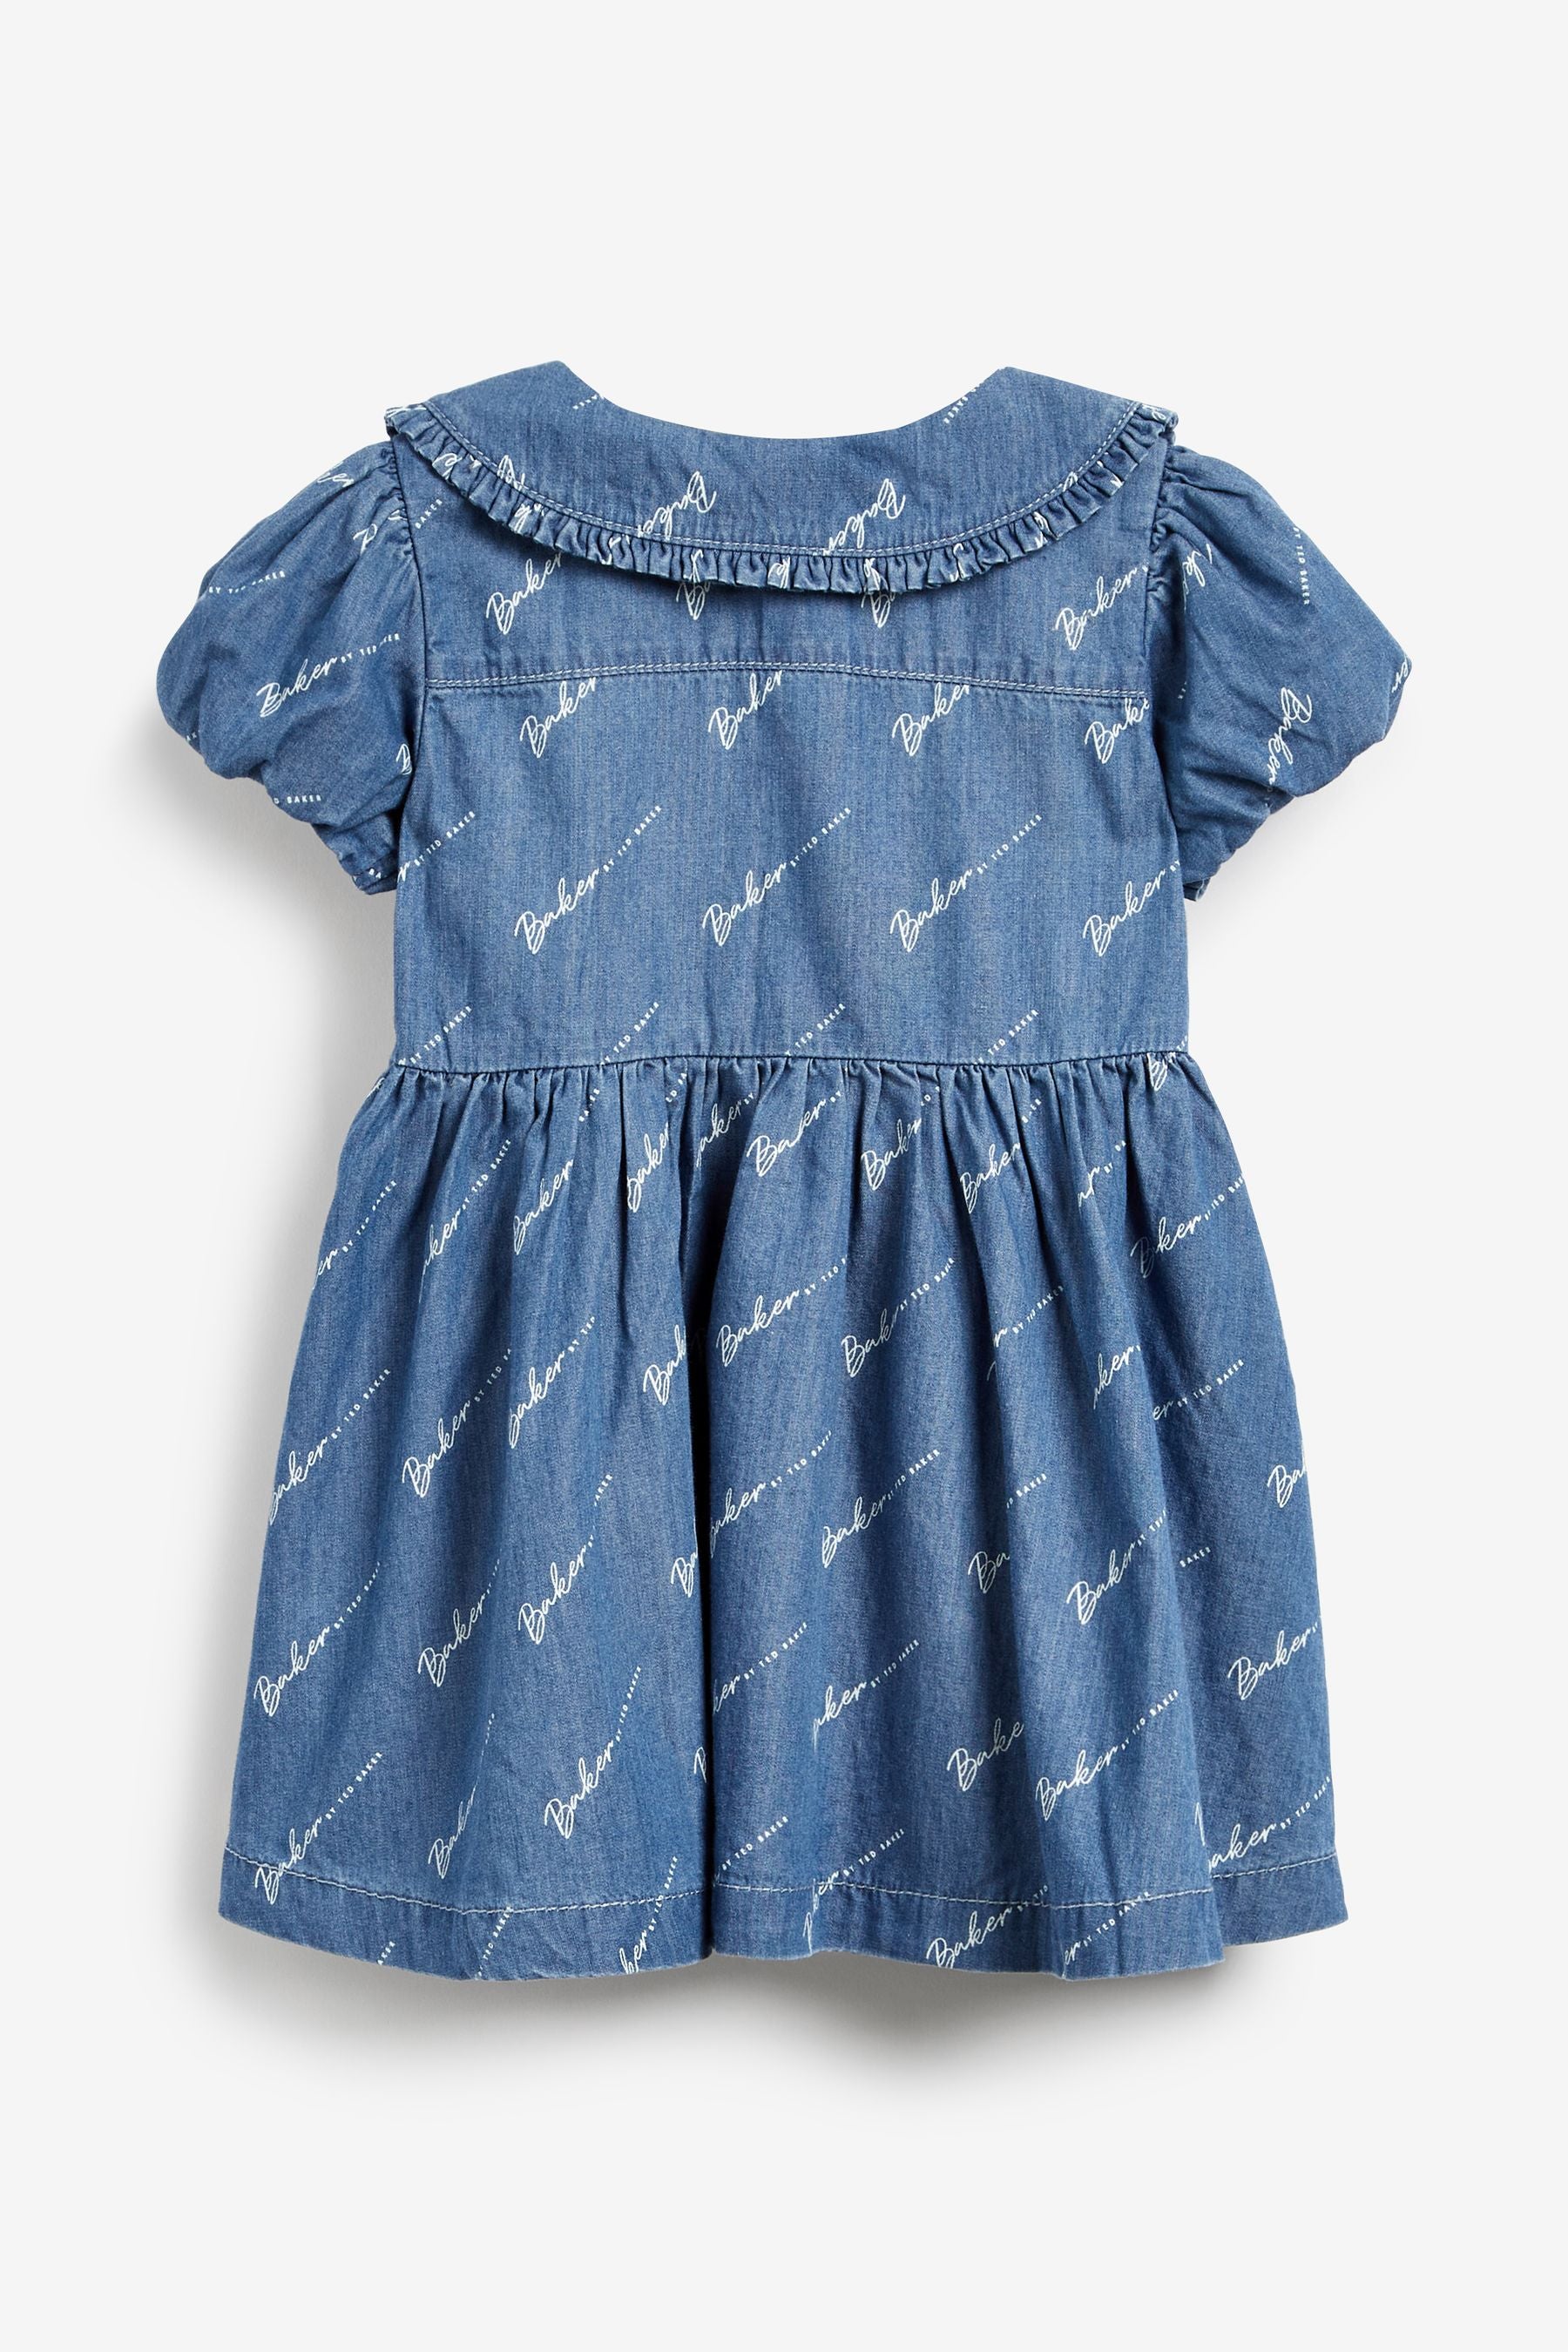 Baker by Ted Baker Chambray Dress